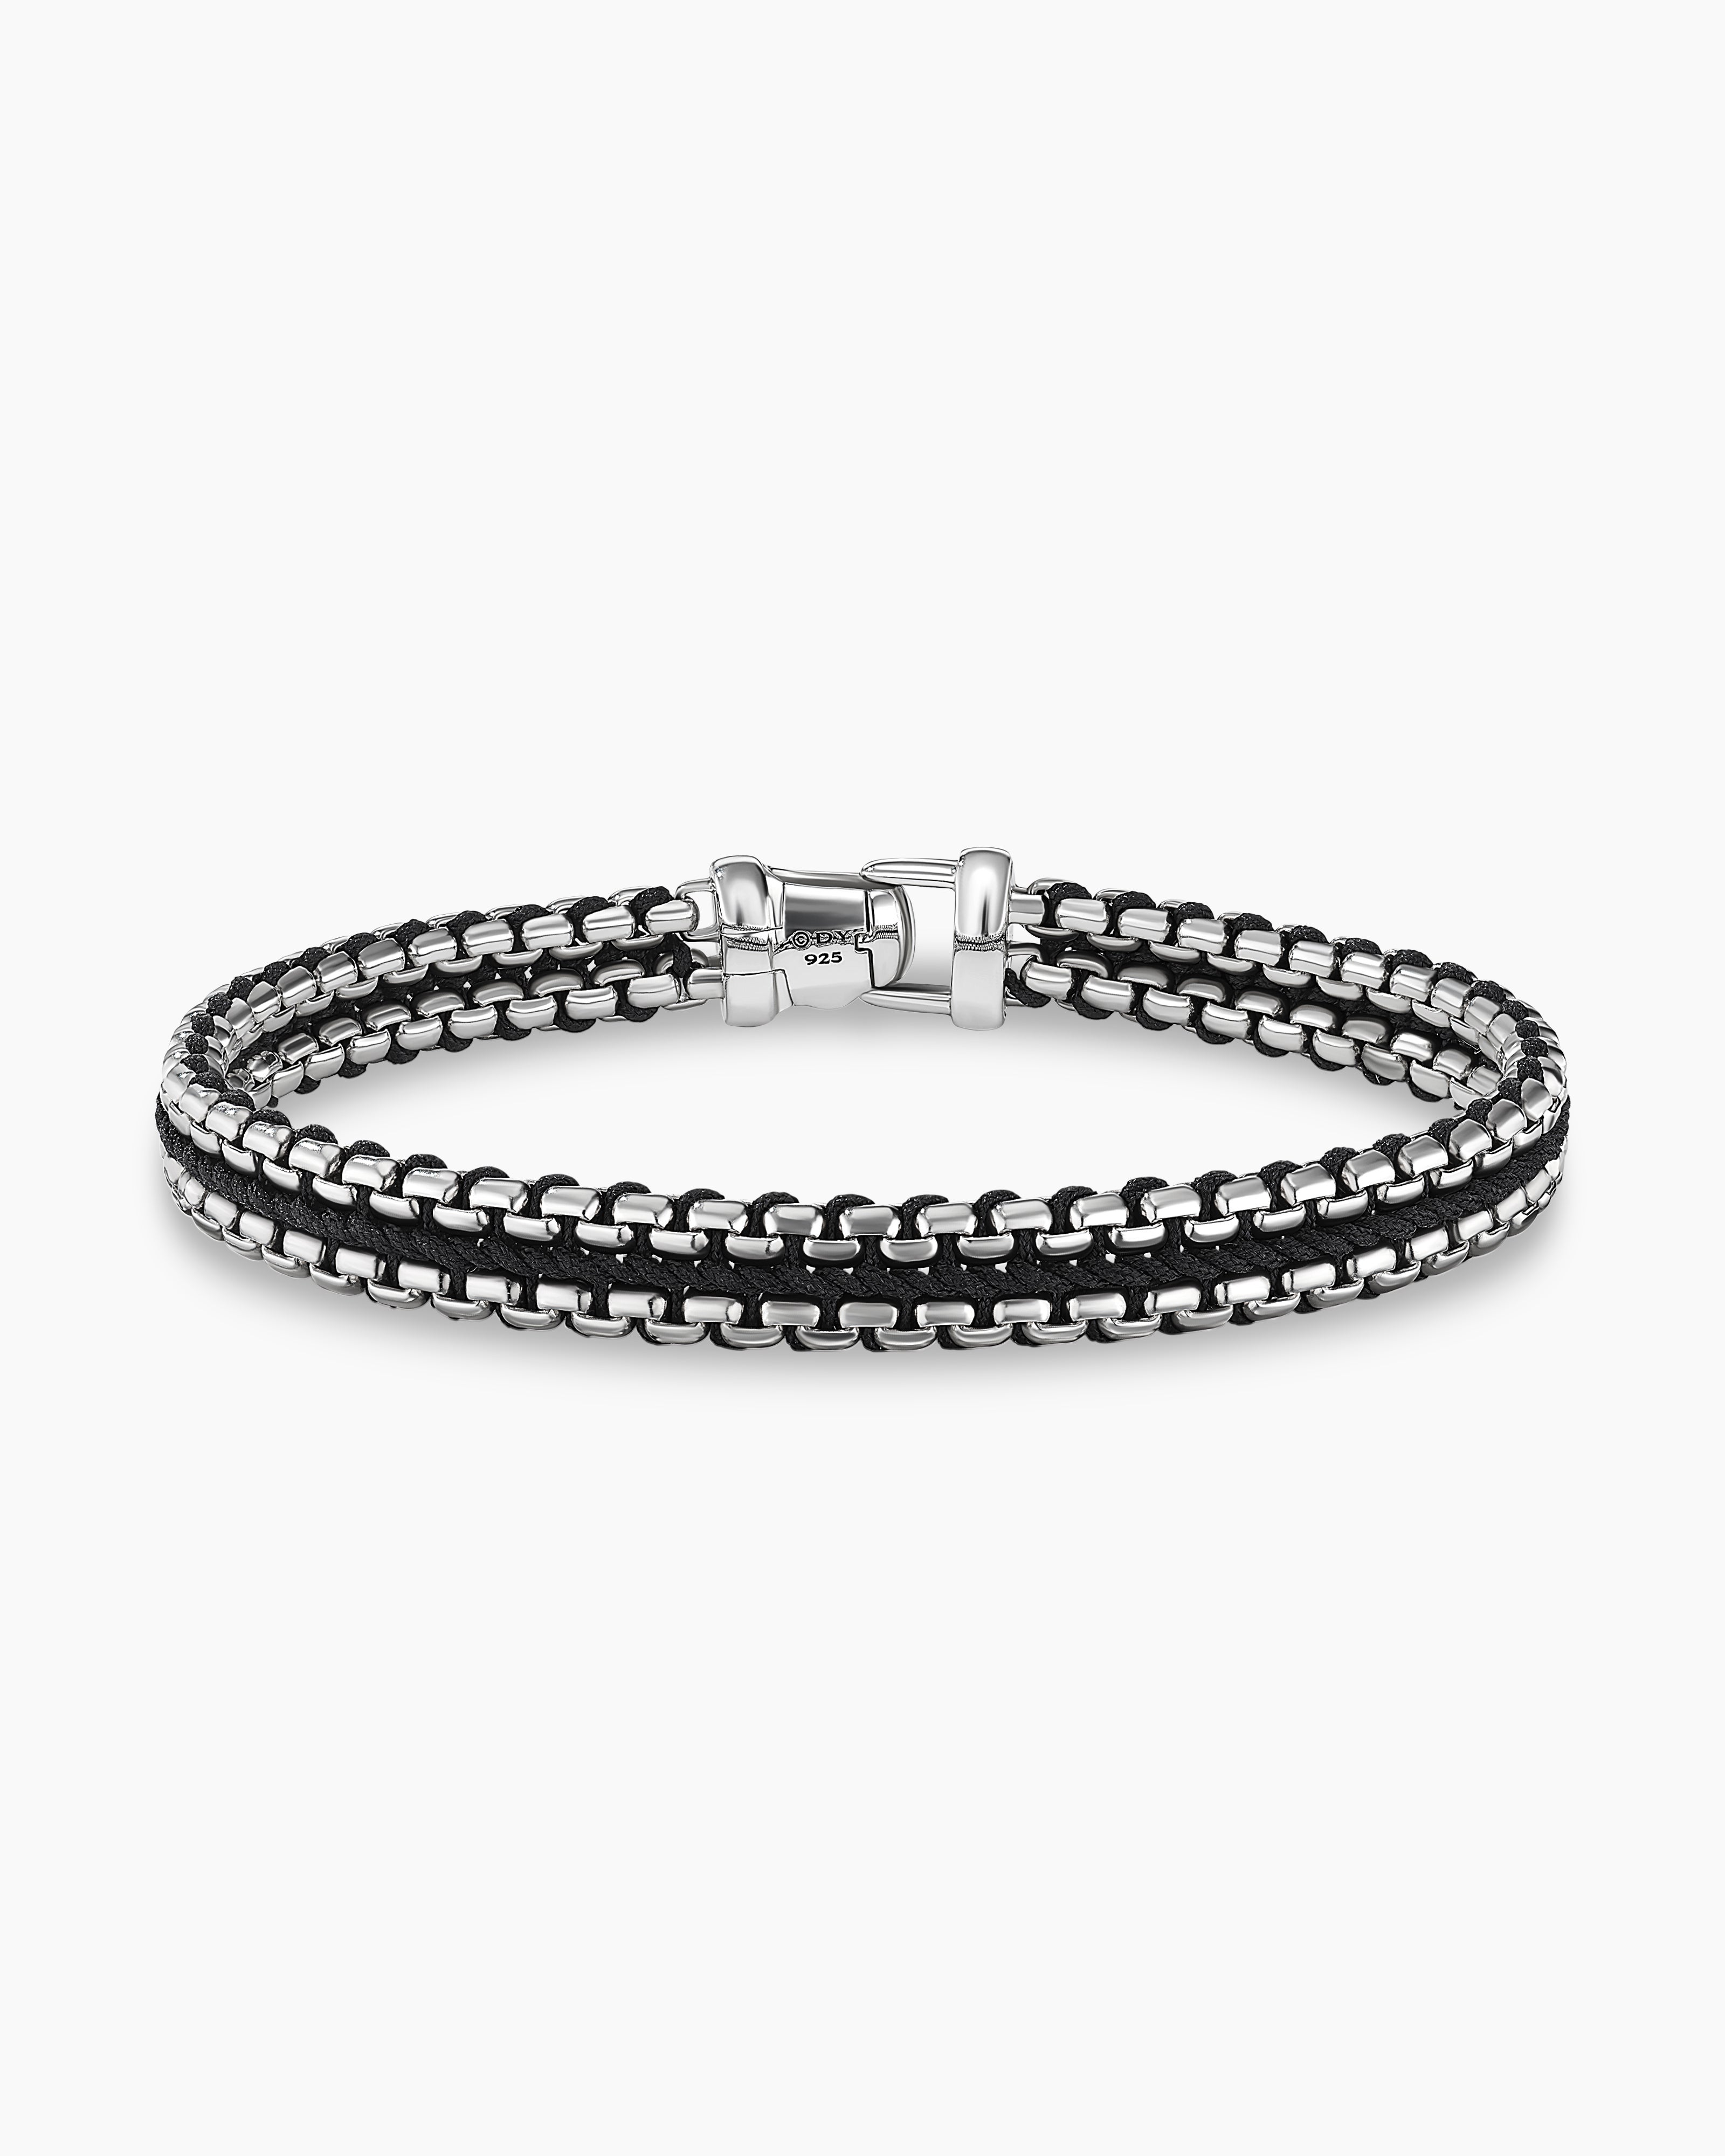 Tradition Black Stone Antique Silver Bangle | G.Rajam Chetty And Sons  Jewellers